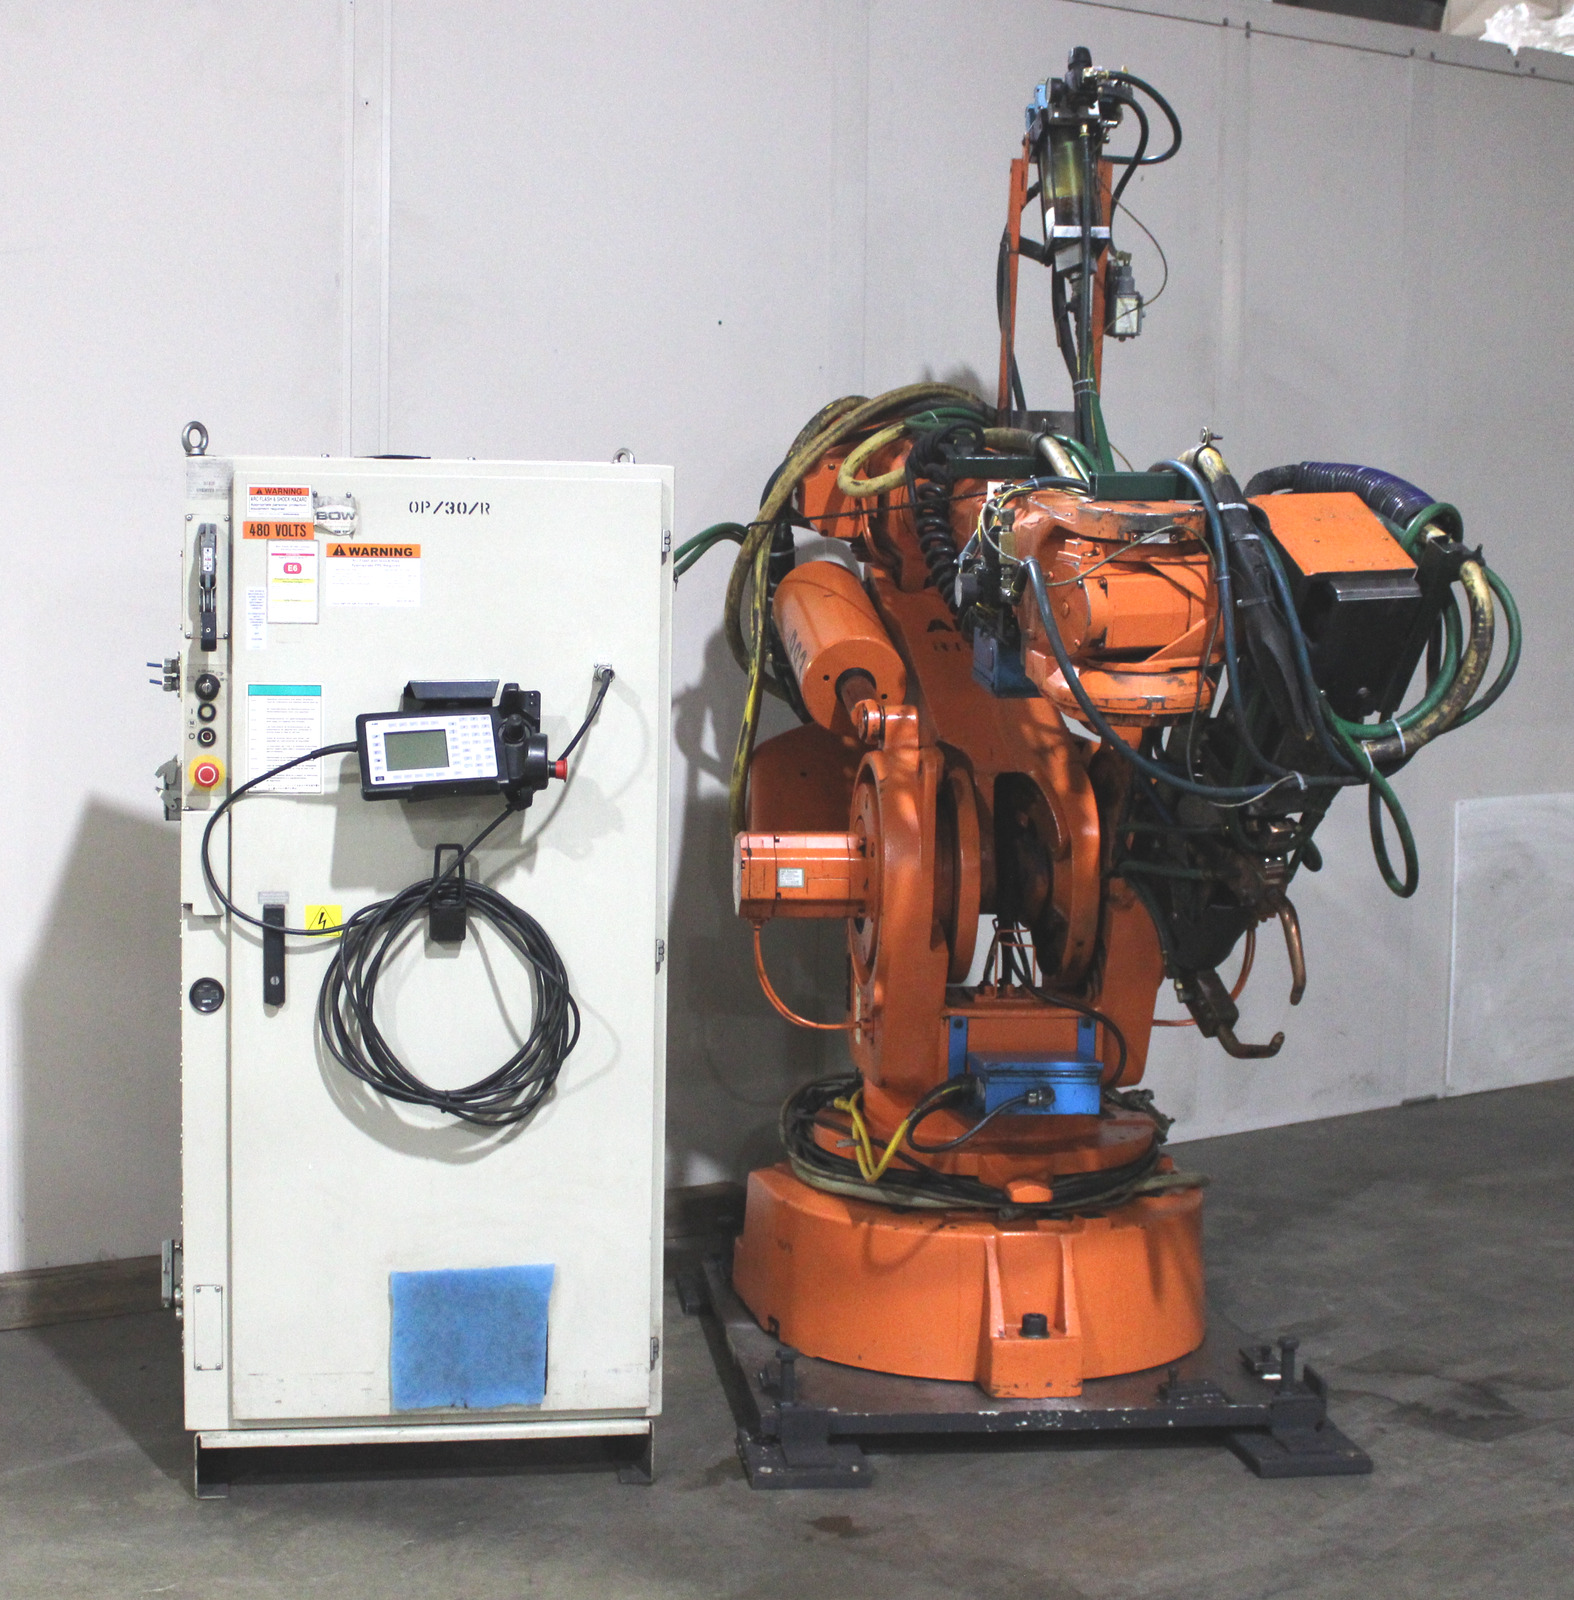 ABB IRB 6400/2.8-120 Robot 120Kg Payload, M96 Control w/RH Spot Weld Tooling